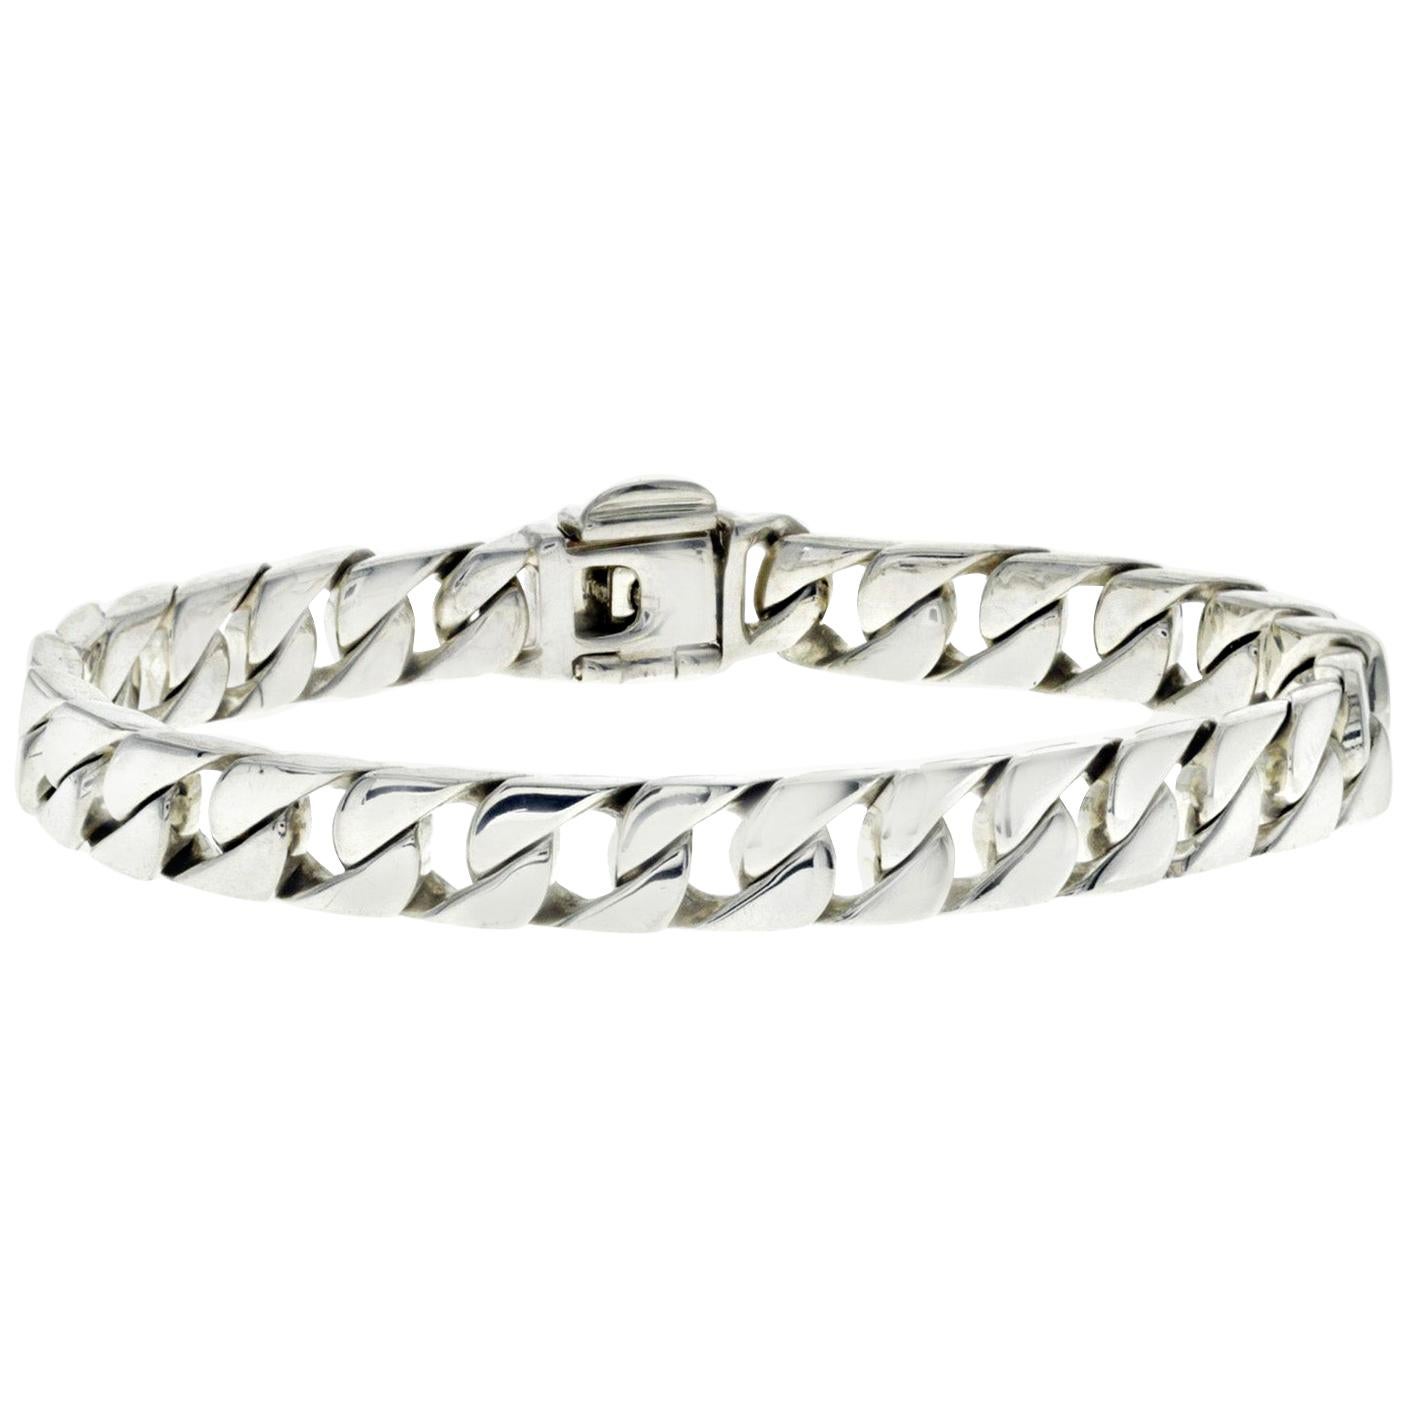 Authentic Tiffany & Co. 925 Sterling Silver Men's Curb Link Bracelet